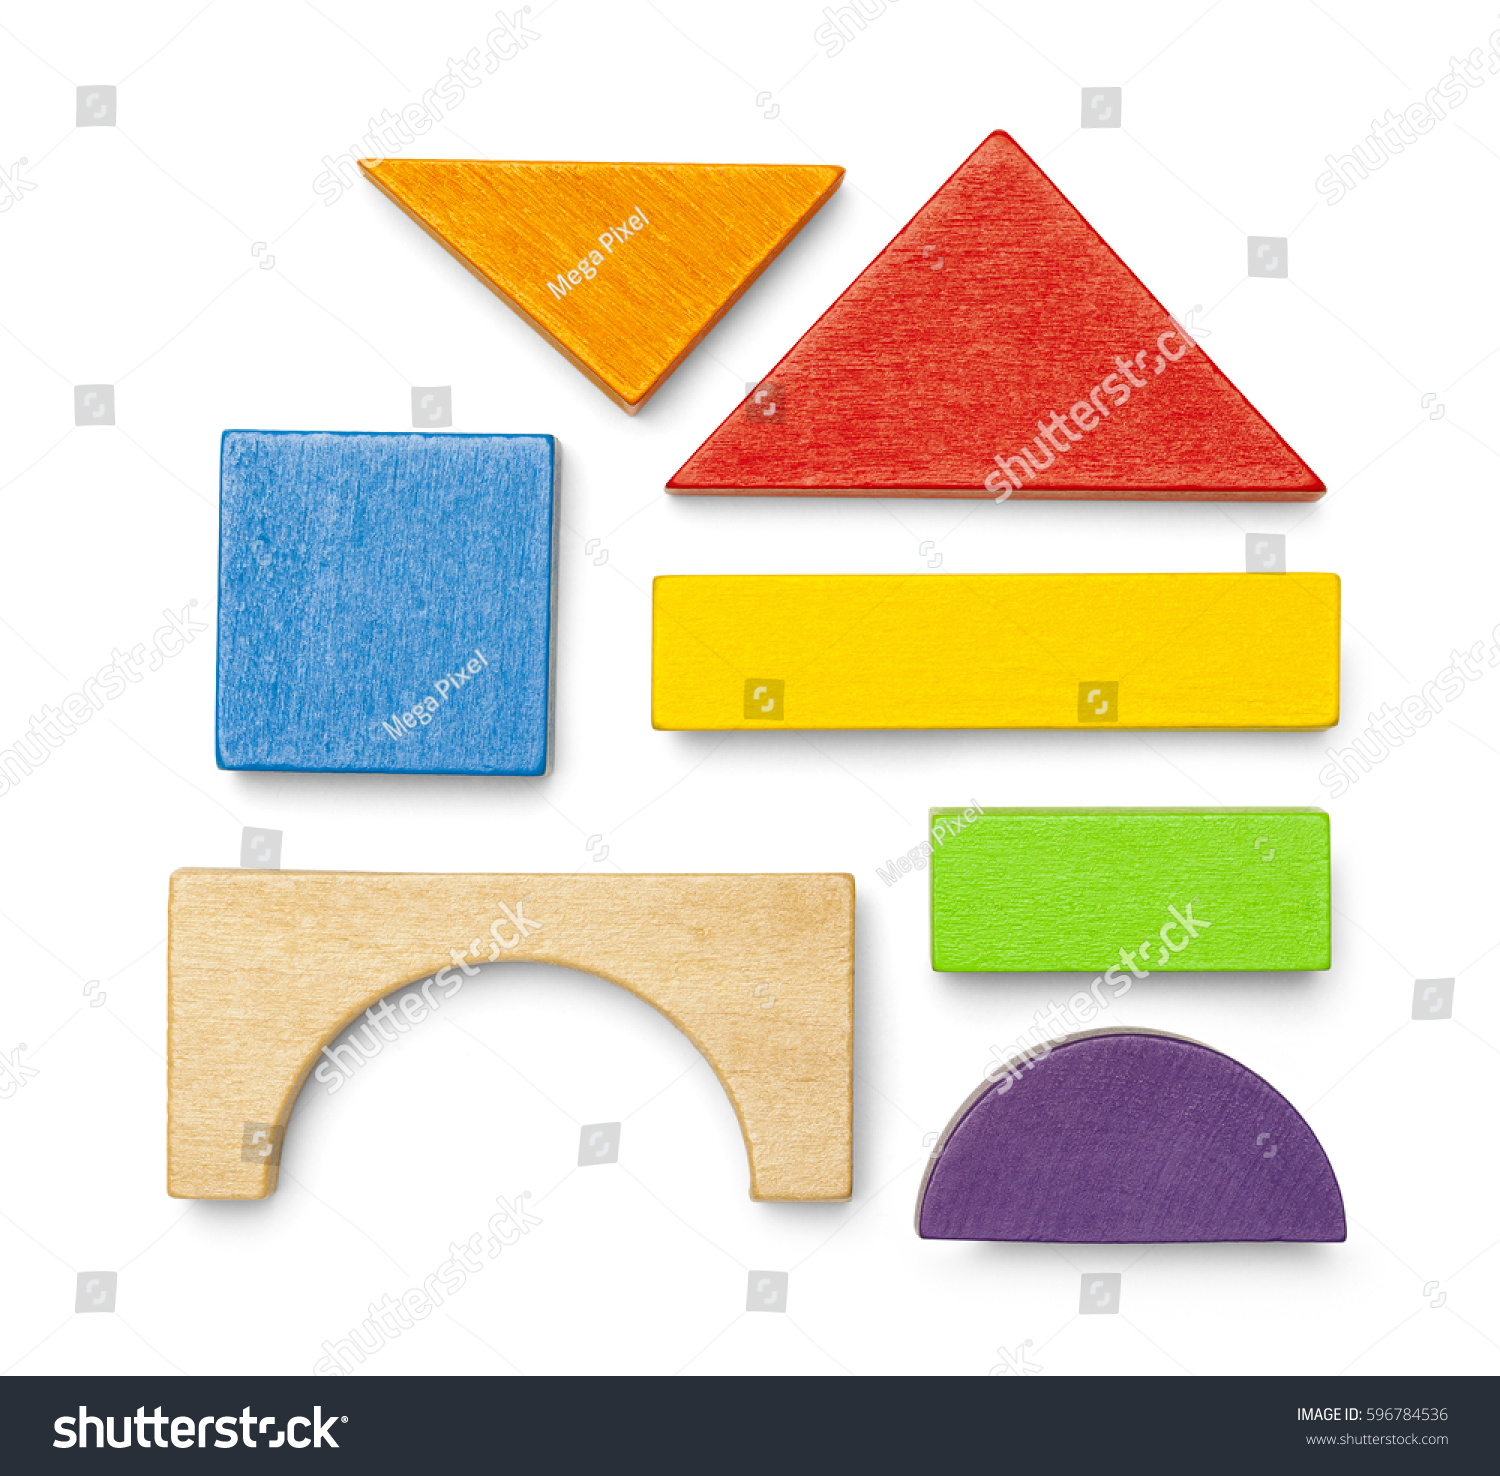 Various Wood Toy Block Pieces and Shapes Isolated on White Background. #596784536